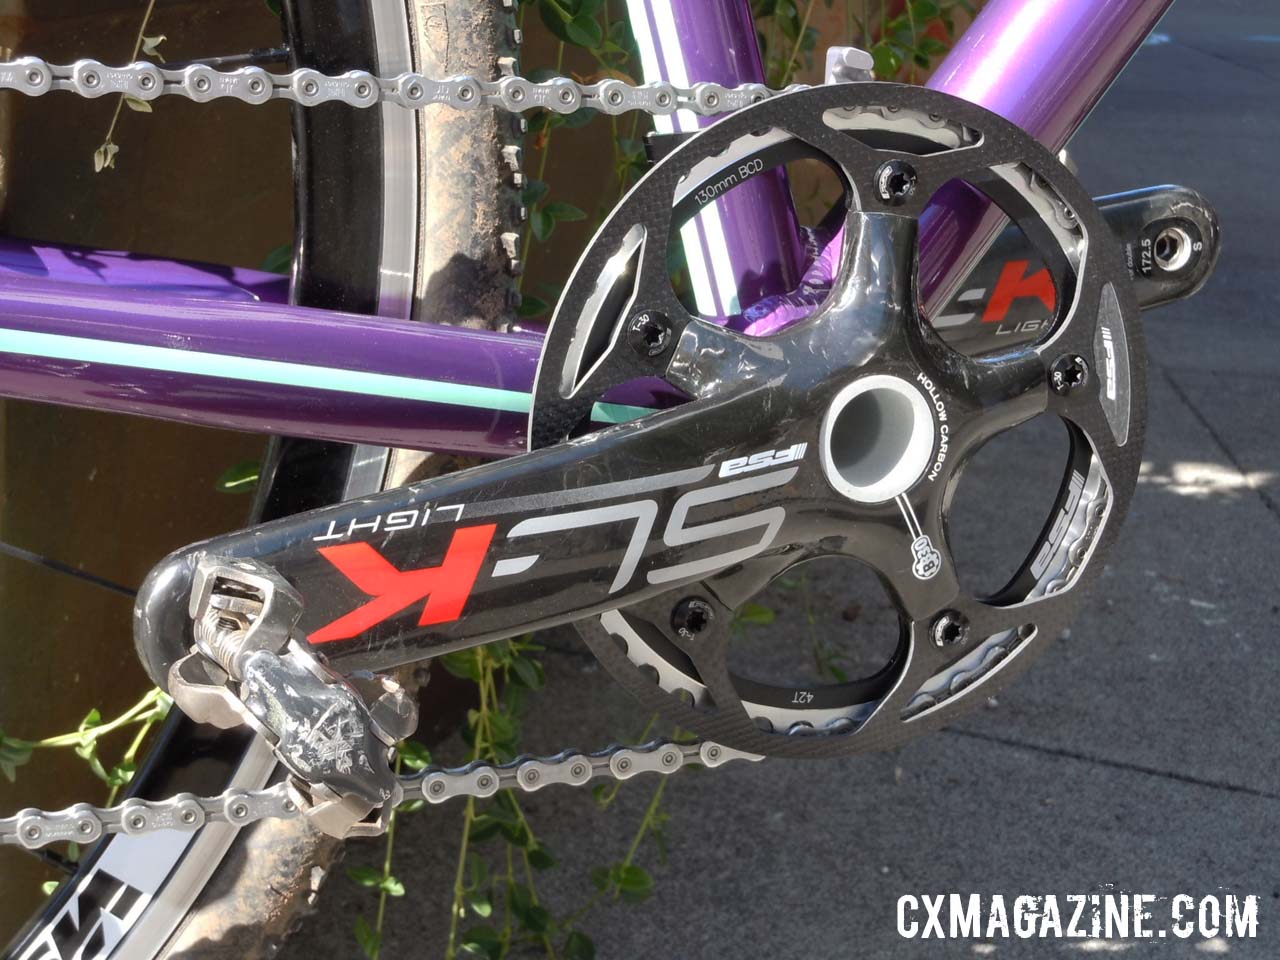 The PF BB30 crankset sports a 42-tooth single ring on the A bike, with a carbon FSA chain guard.